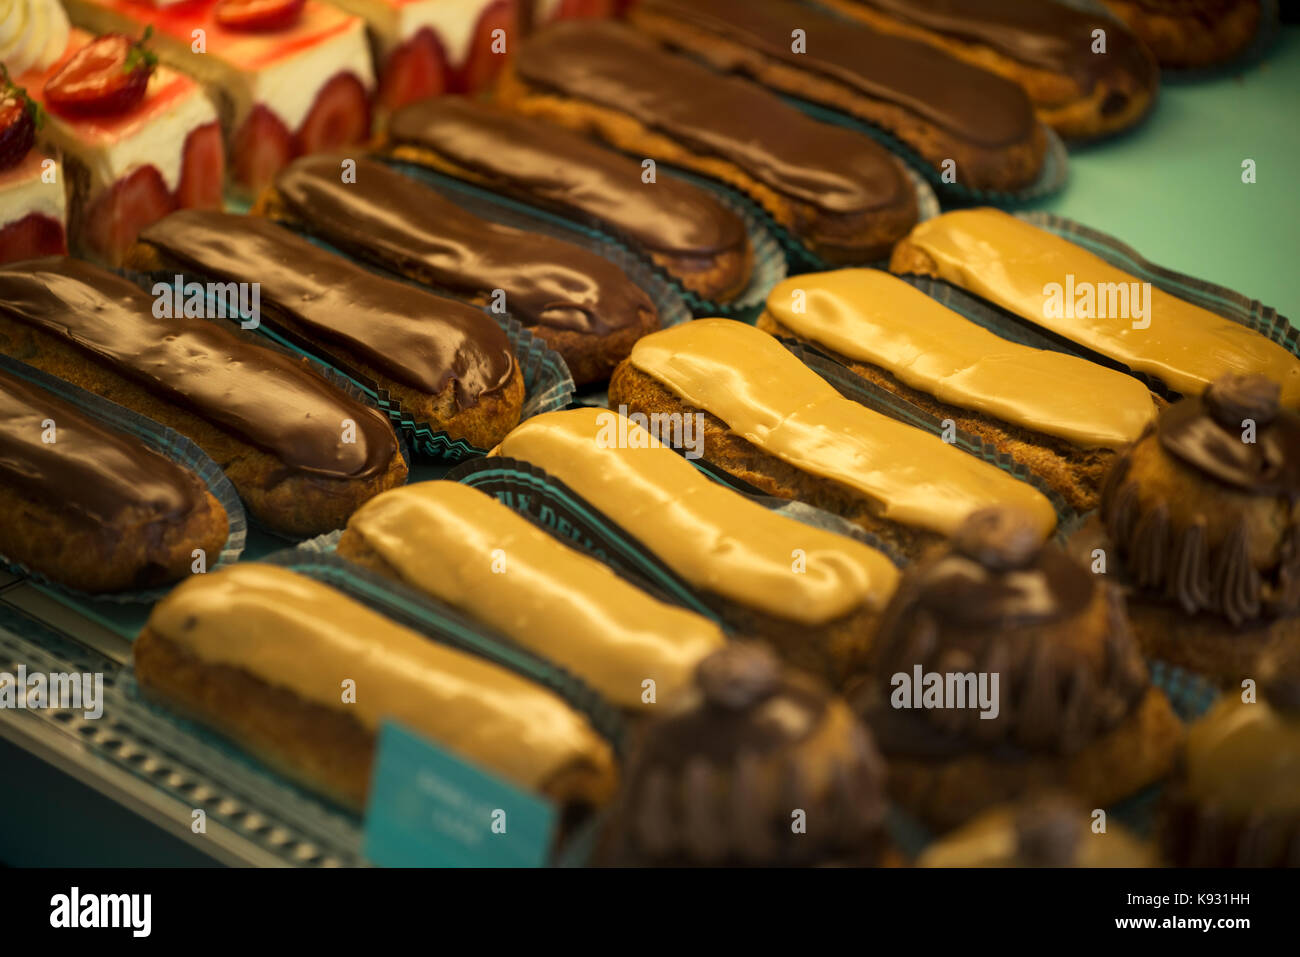 Eclair cakes in a patisserie in Falaise,Calvados, Normandy, France. Aug 2017 Stock Photo